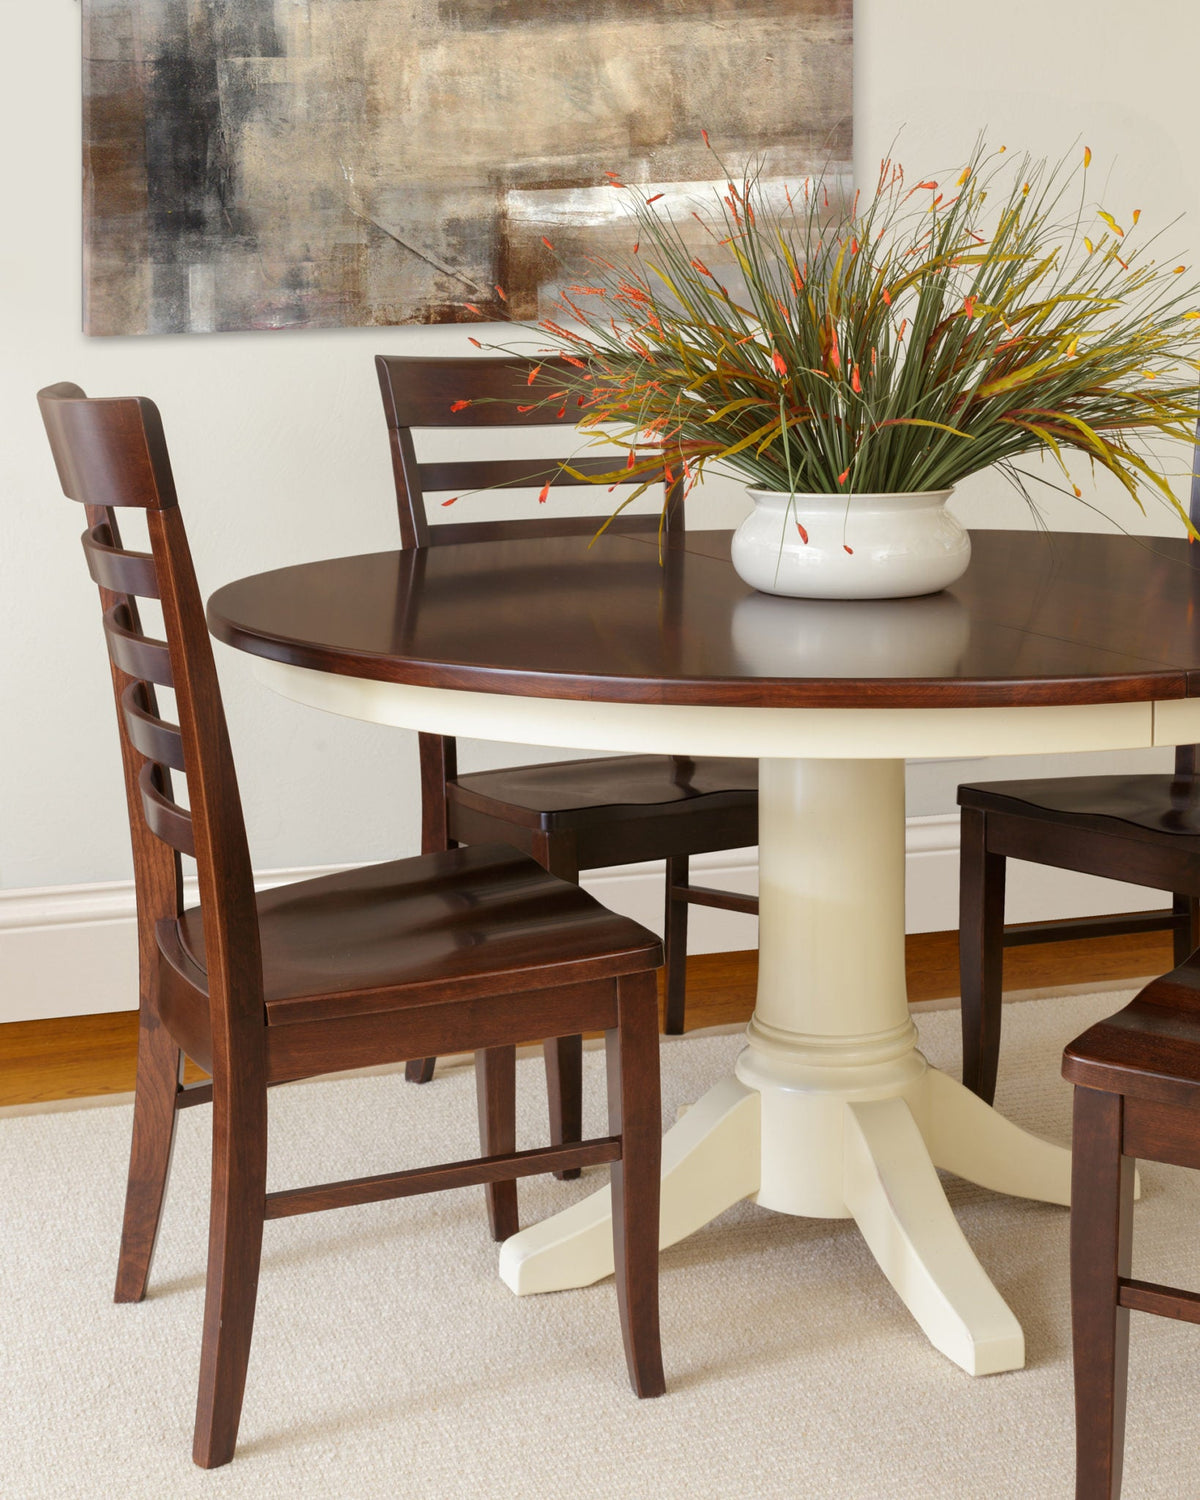 Capri Dining Chair - snyders.furniture